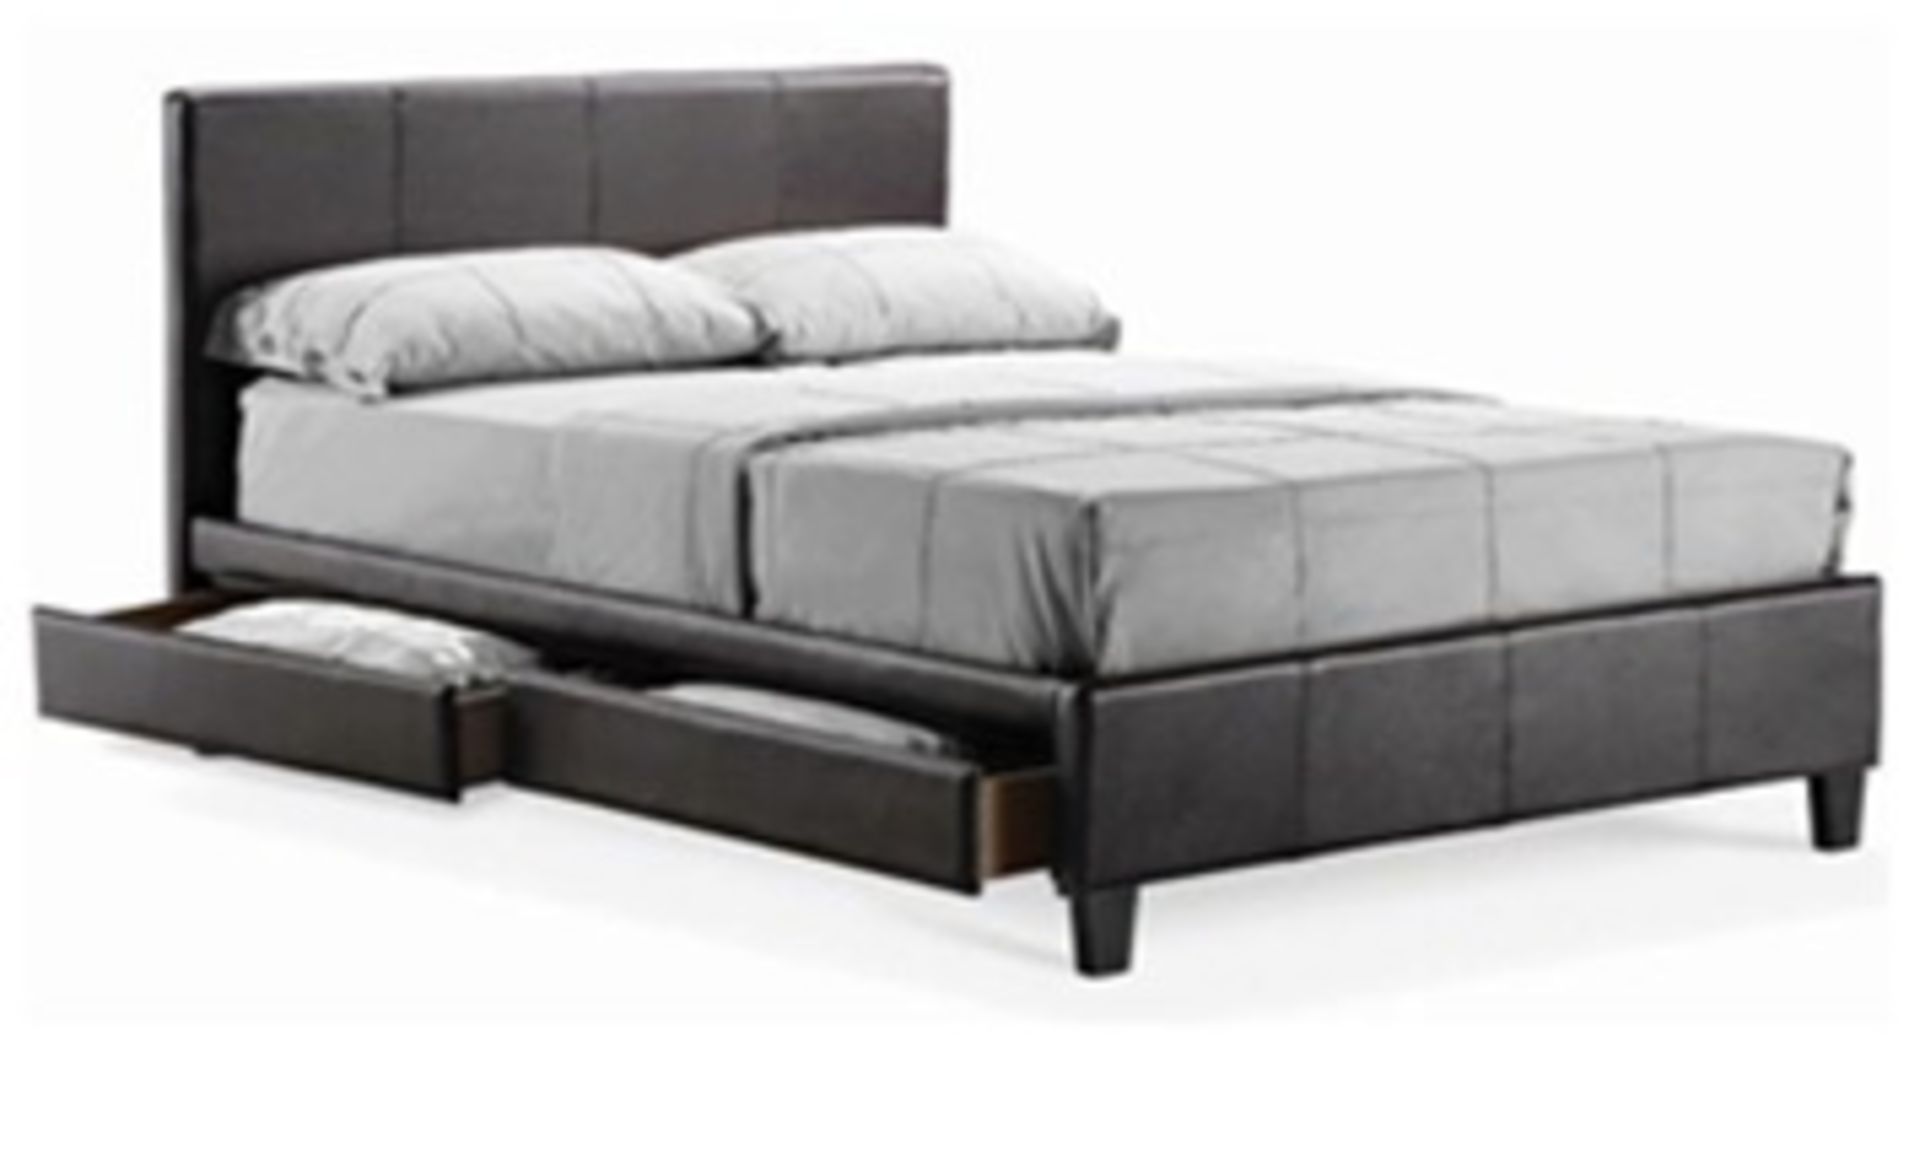 1 x Black Faux Leather Bed (Brand New & Boxed)